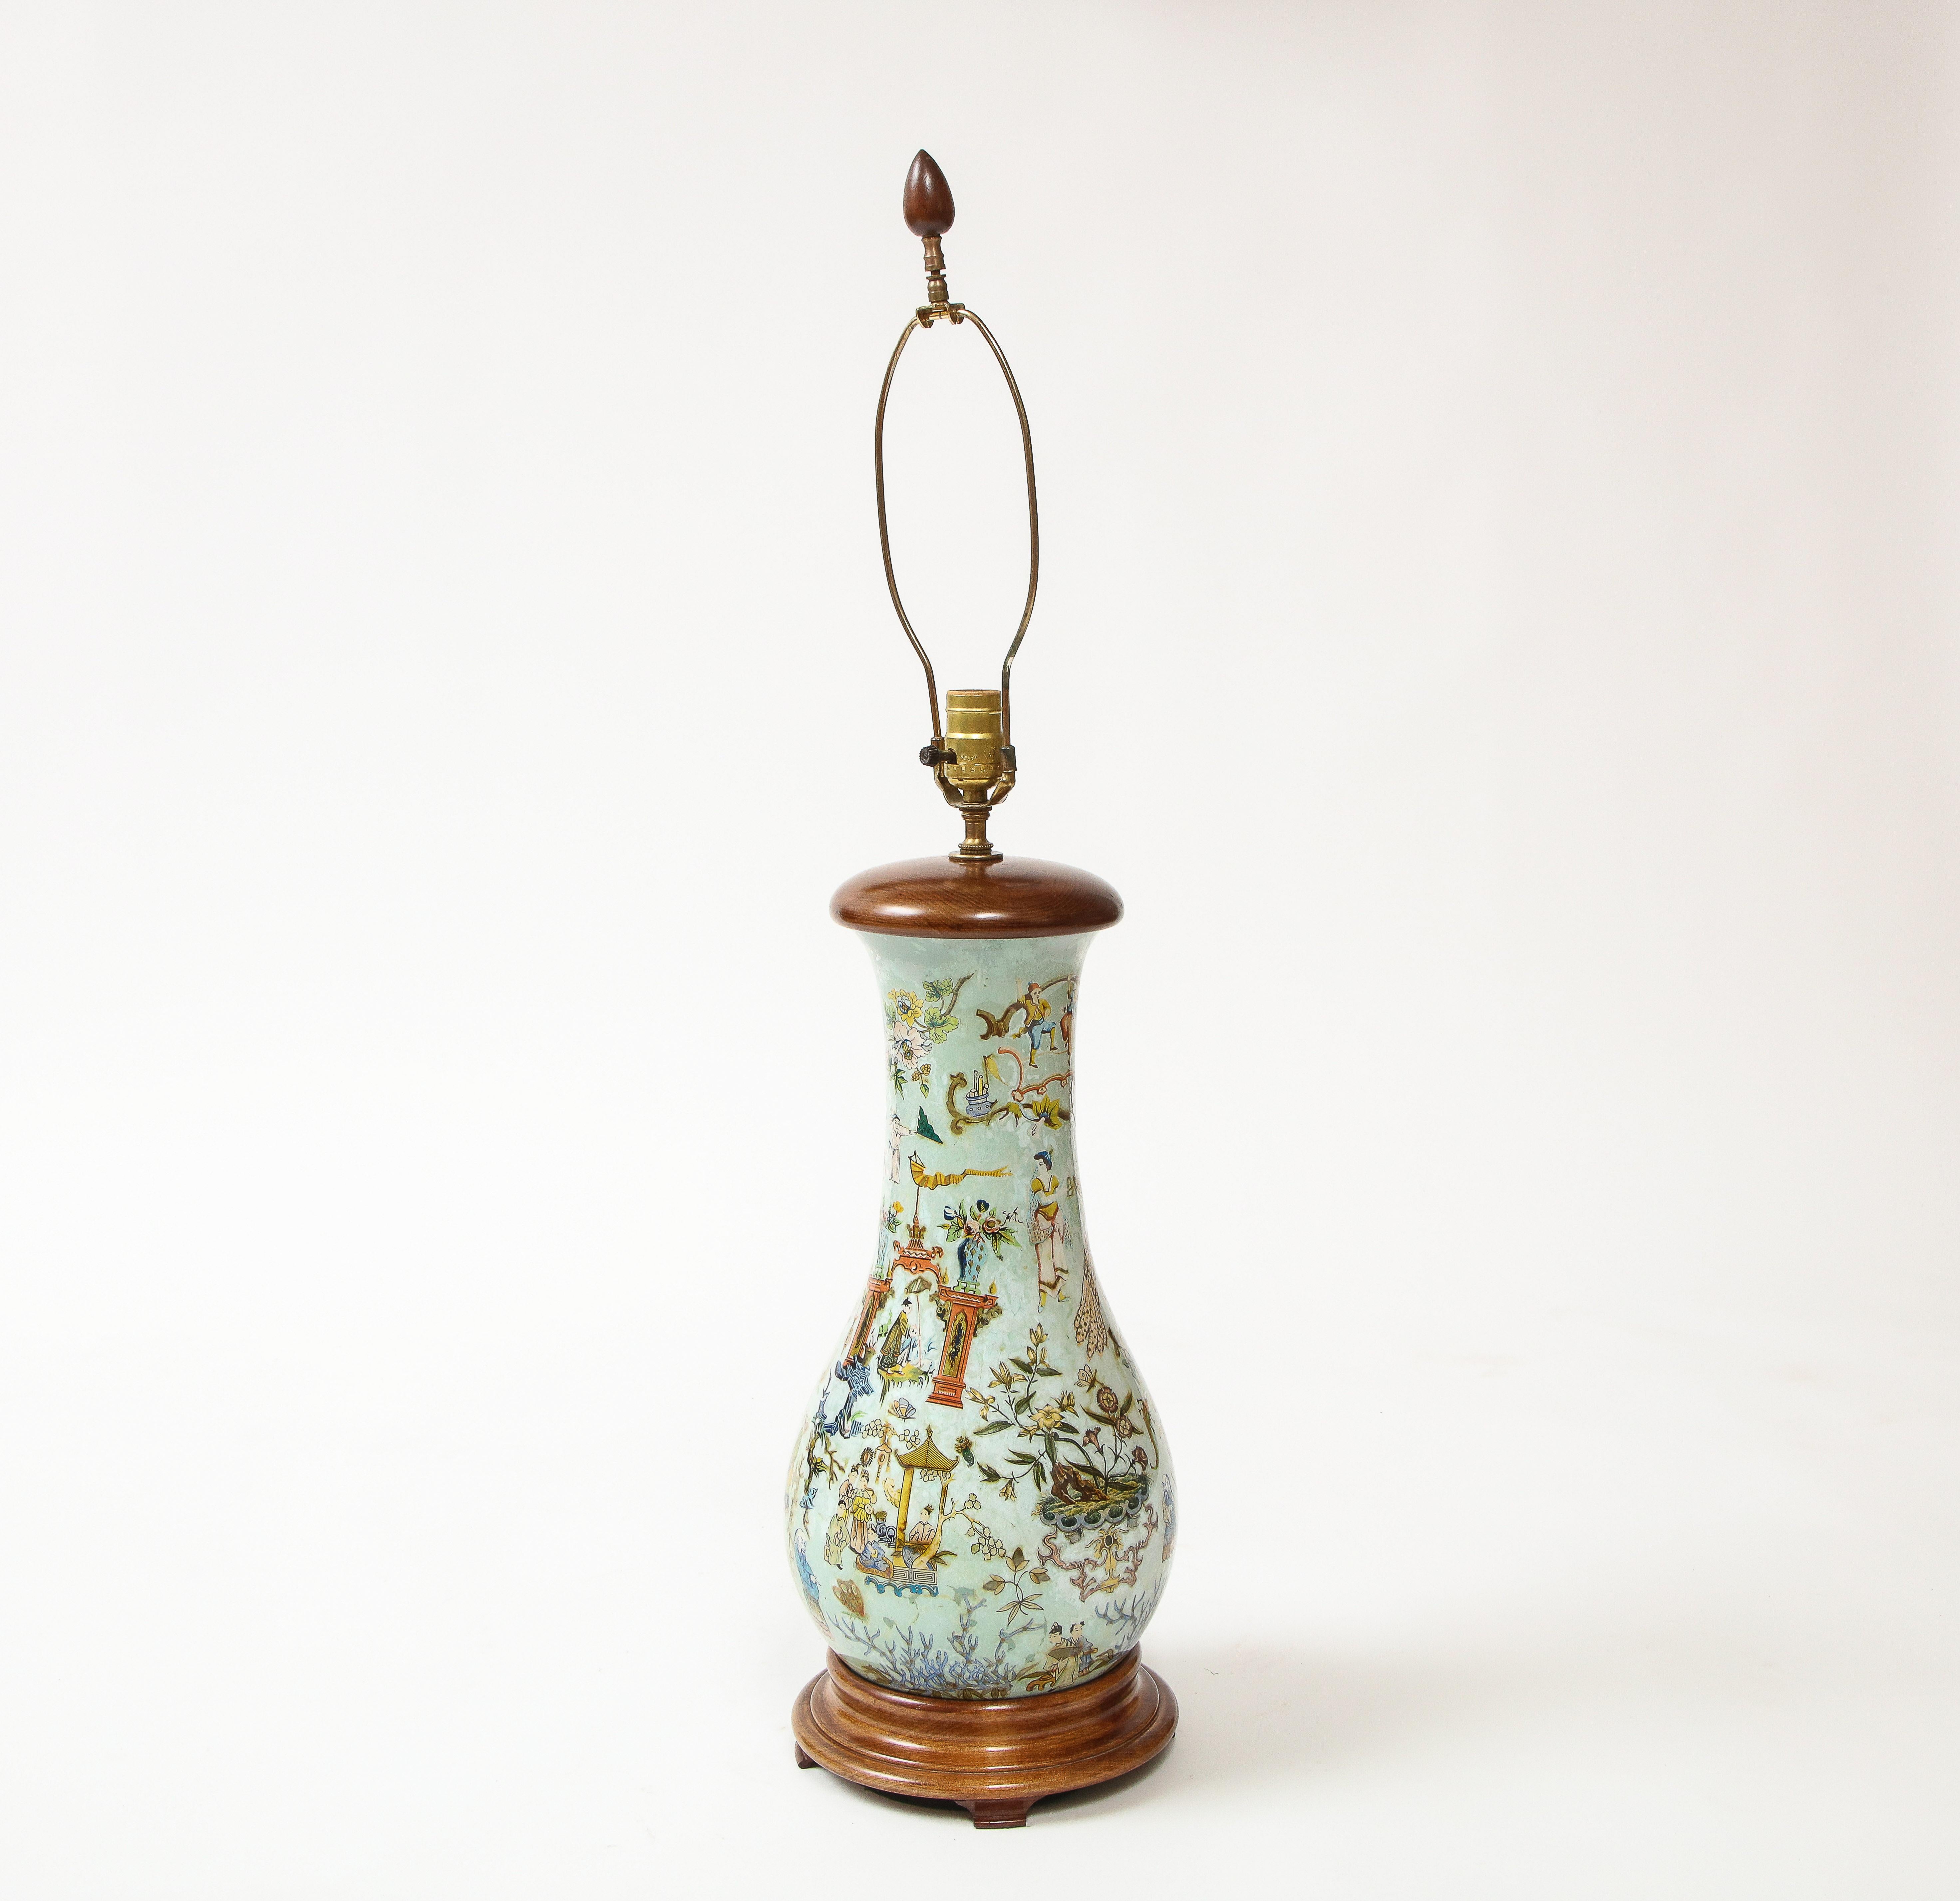 Of pear shape, decorated overall with Chinese-inspired figures at play in a fantasy garden of insects, birds, foliage, and pagodas, on a turned wood plinth base; mounted as a lamp with brass bulb socket and removable harp.